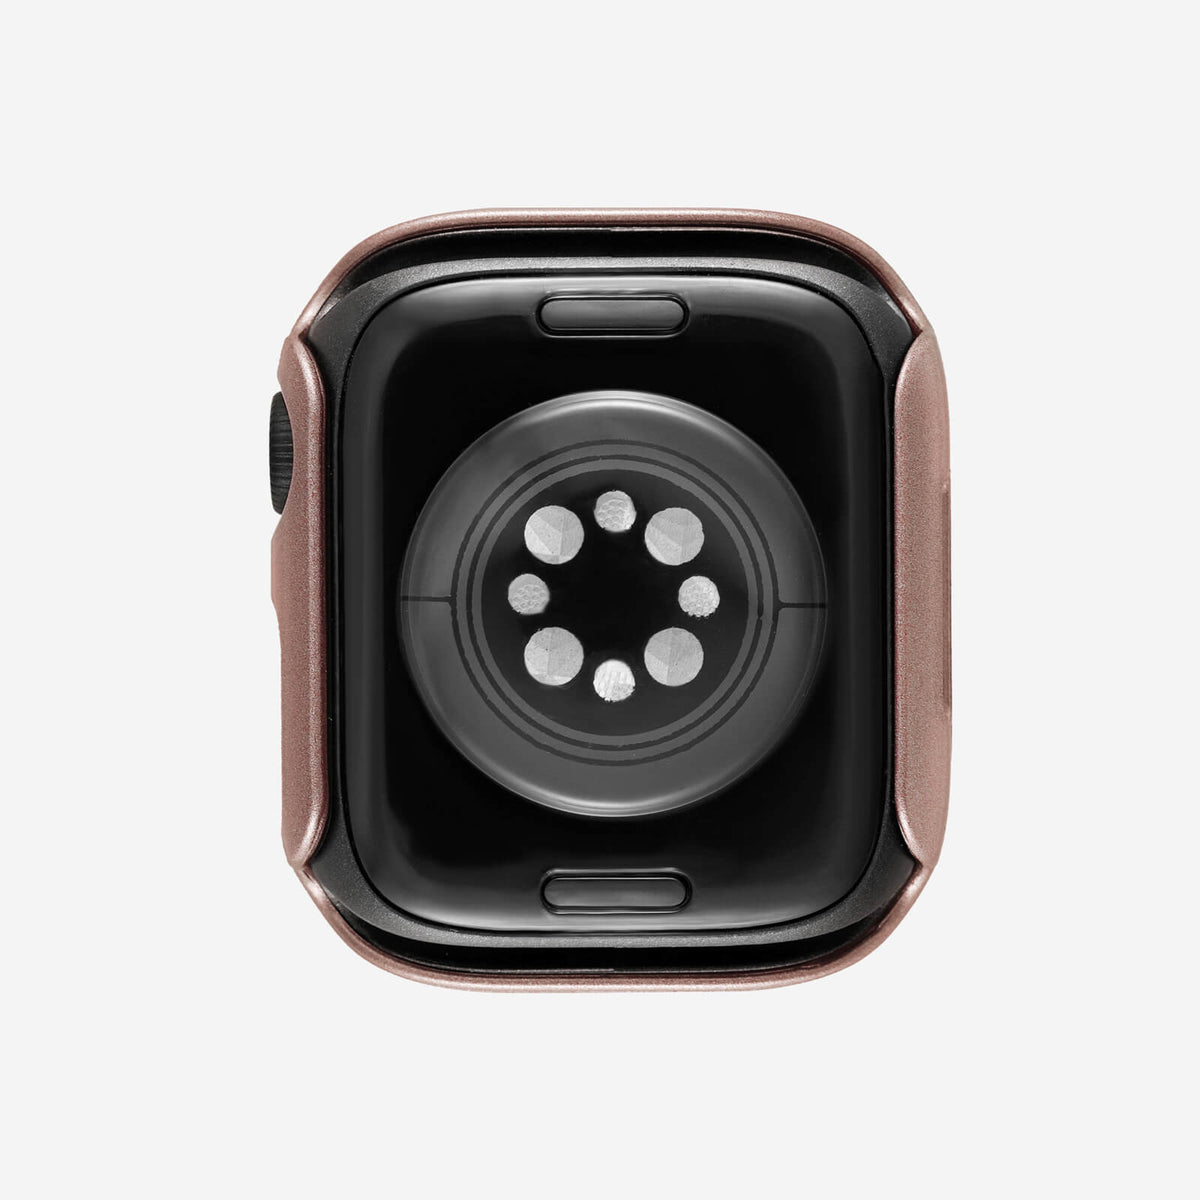 Apple Watch Slim Screen Protector Case - Rose Gold